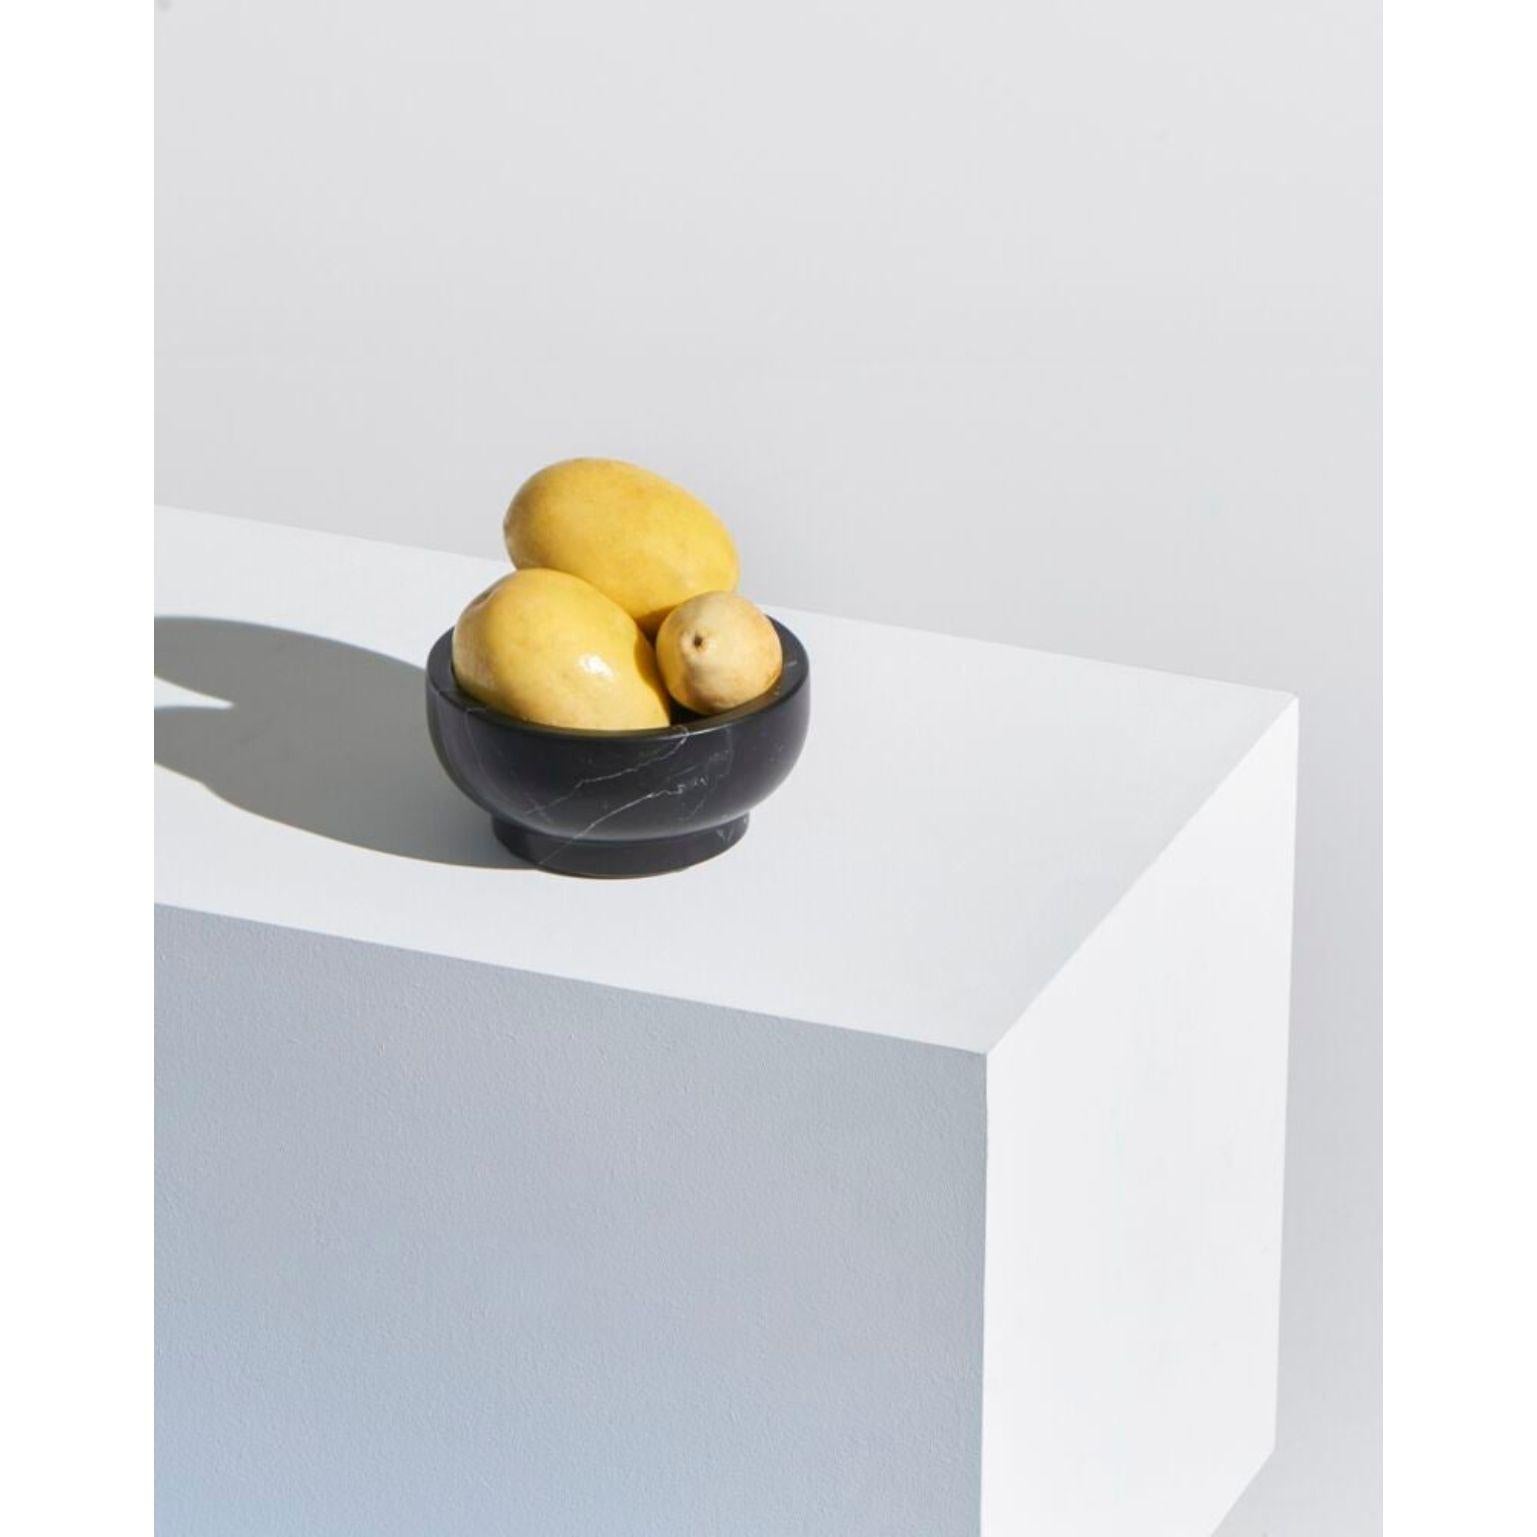 Memory bowl - black by Cristoforo Trapani
Magnolia table Collection
Dimensions: 17 x 8.5 cm
Materials: Nero Marquinia

Also available: Red (Rosso Levanto)

Contemporary chefs love to construct their culinary creations to enhance their impact;